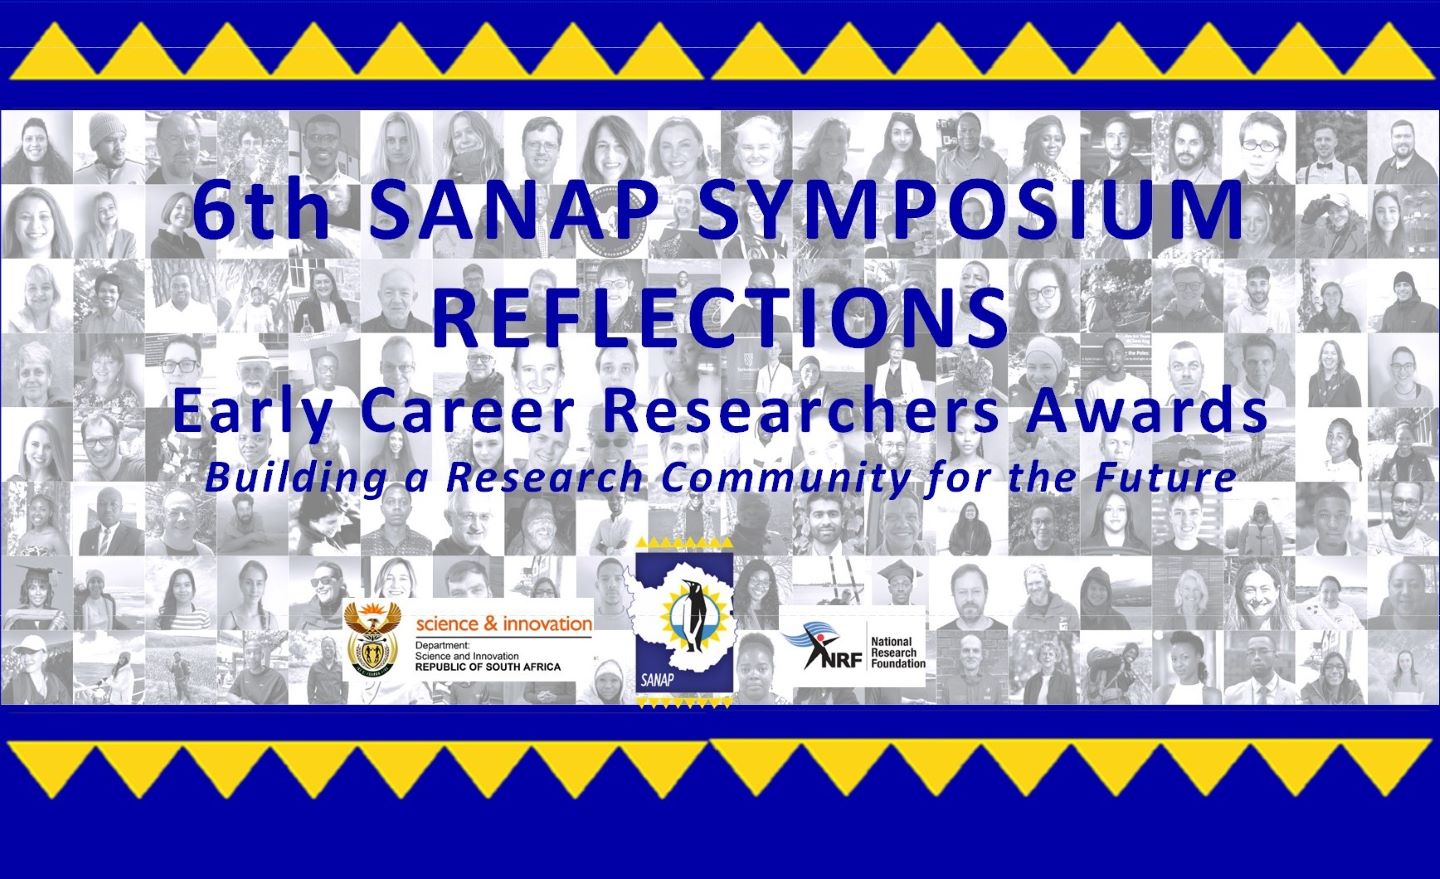 6th SANAP Symposium Reflections: Early Career Researcher’s Awards